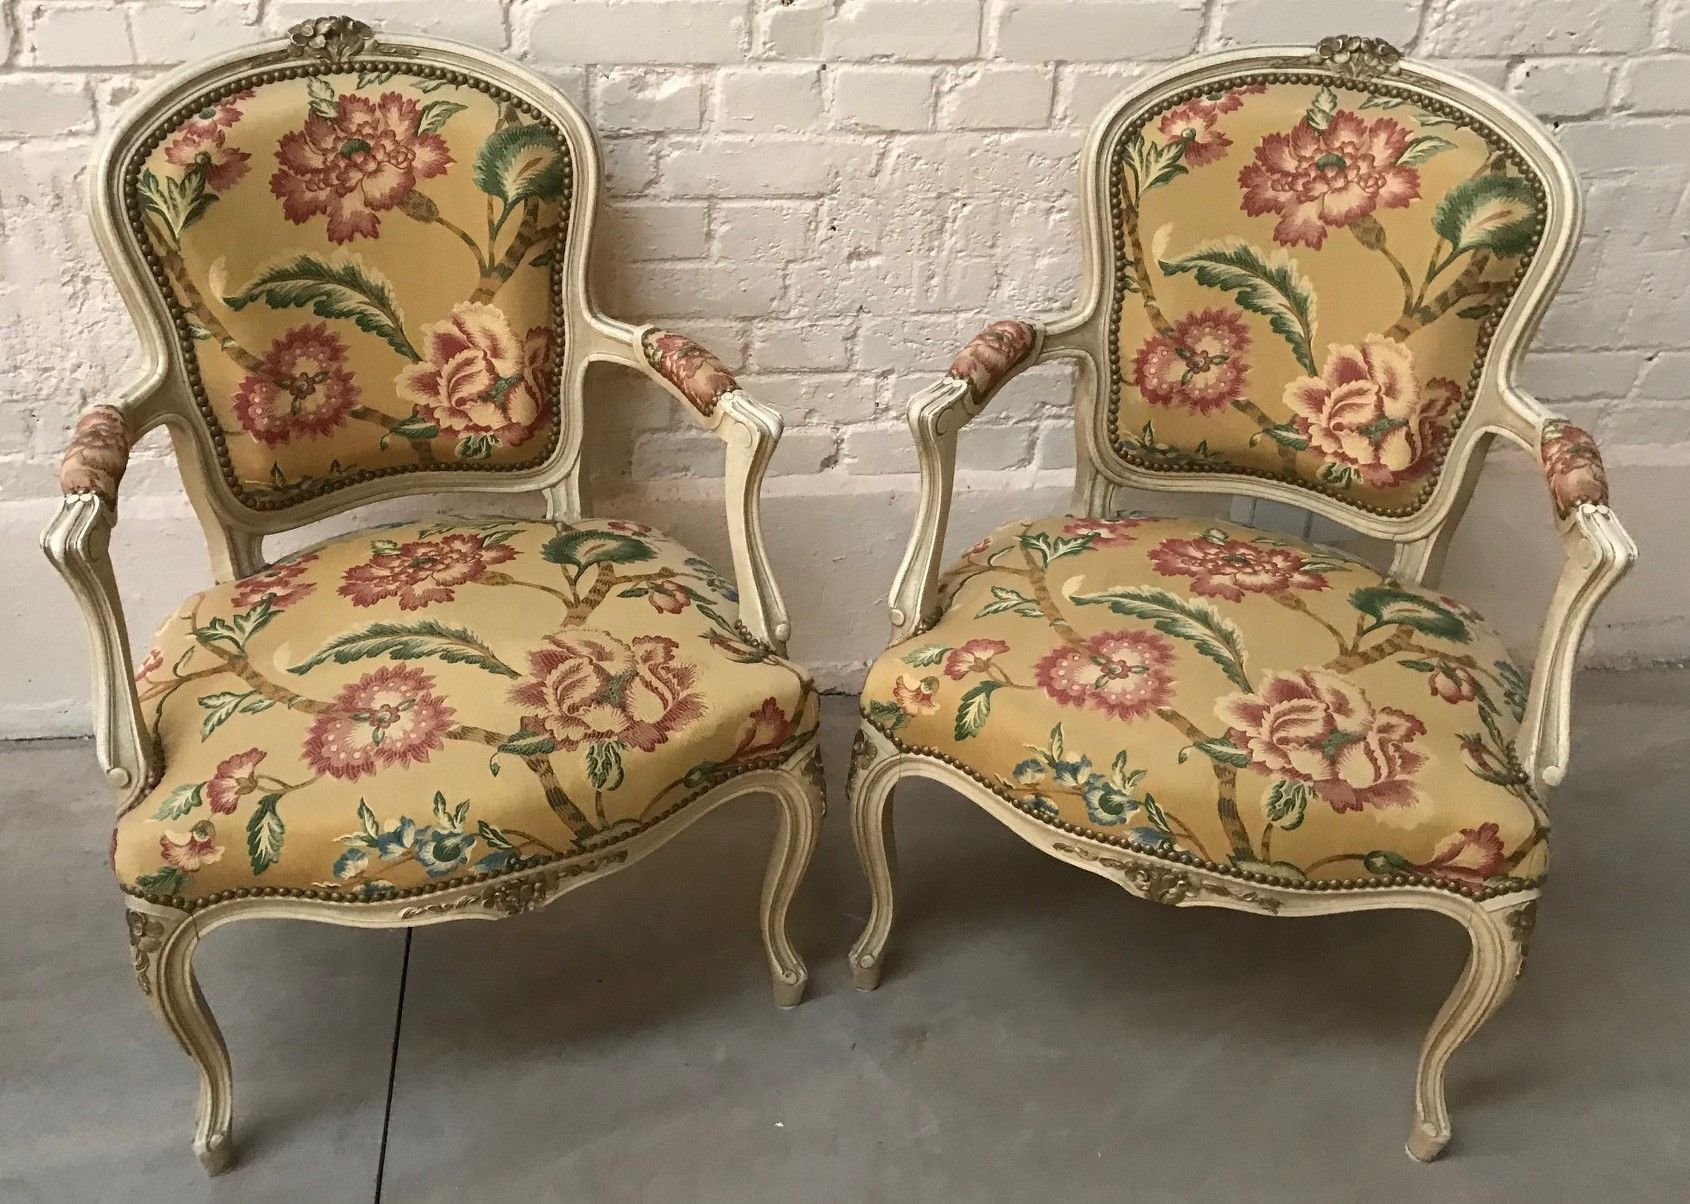 Null PAIR OF CABRIOLETS ARMCHAIRS LACQUERED LOUIS XV

In lacquered and gilded wo&hellip;